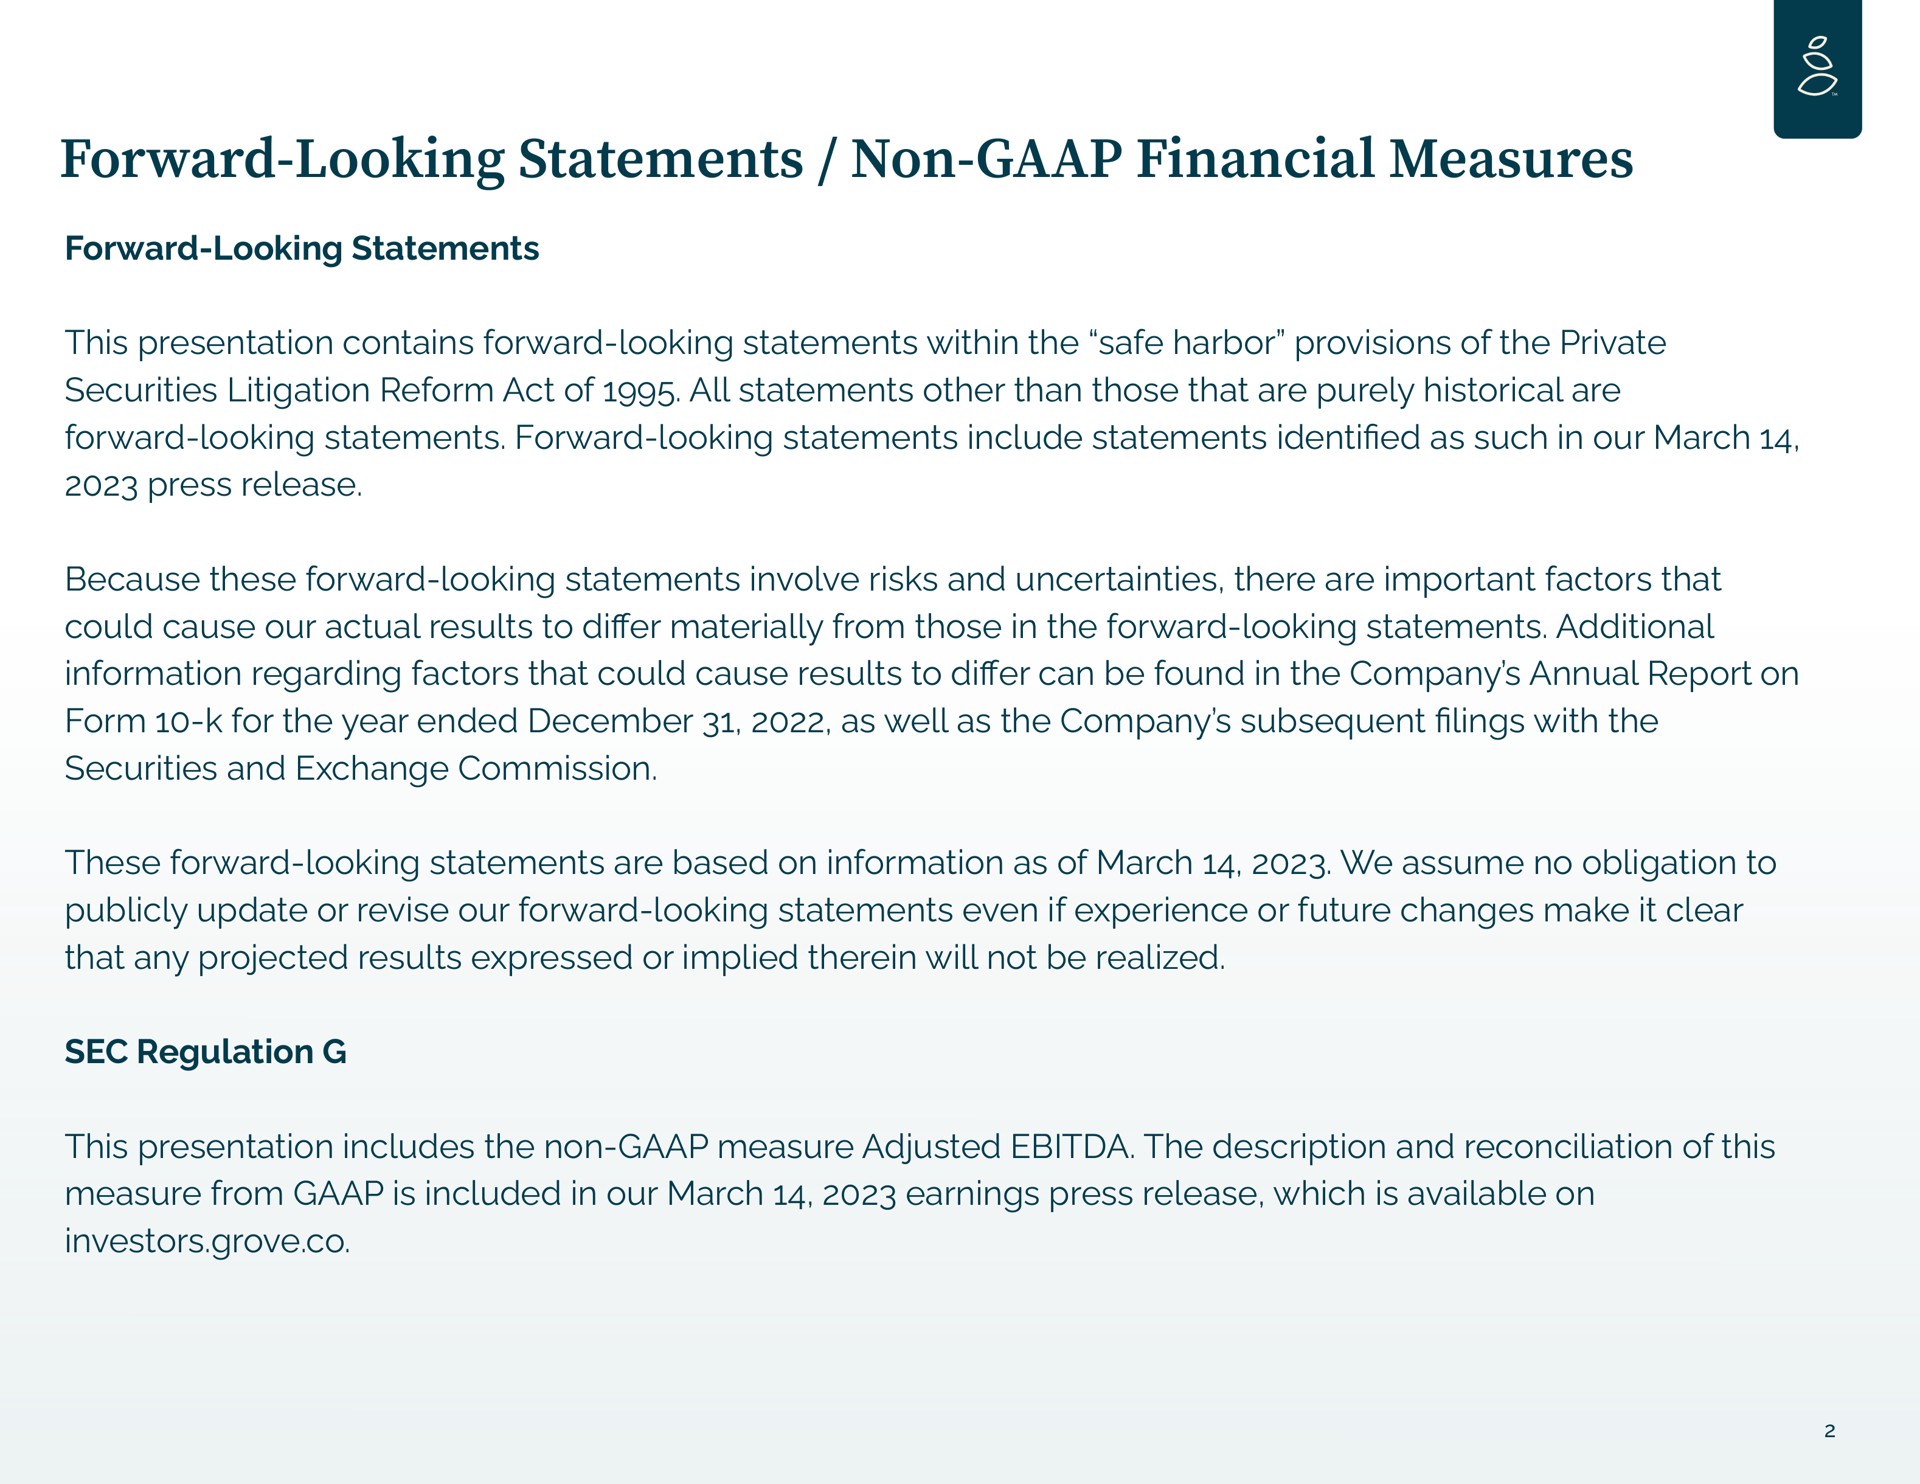 forward looking statements non financial measures forward looking statements this presentation contains forward looking statements within the safe harbor provisions of the private securities litigation reform act of all statements other than those that are purely historical are forward looking statements forward looking statements include statements as such in our march press release because these forward looking statements involve risks and uncertainties there are important factors that could cause our actual results to materially from those in the forward looking statements additional information regarding factors that could cause results to can be found in the company annual report on form for the year ended as well as the company subsequent lings with the securities and exchange commission these forward looking statements are based on information as of march we assume no obligation to publicly update or revise our forward looking statements even if experience or future changes make it clear that any projected results expressed or implied therein will not be realized sec regulation this presentation includes the non measure adjusted the description and reconciliation of this measure from is included in our march earnings press release which is available on investors grove | Grove